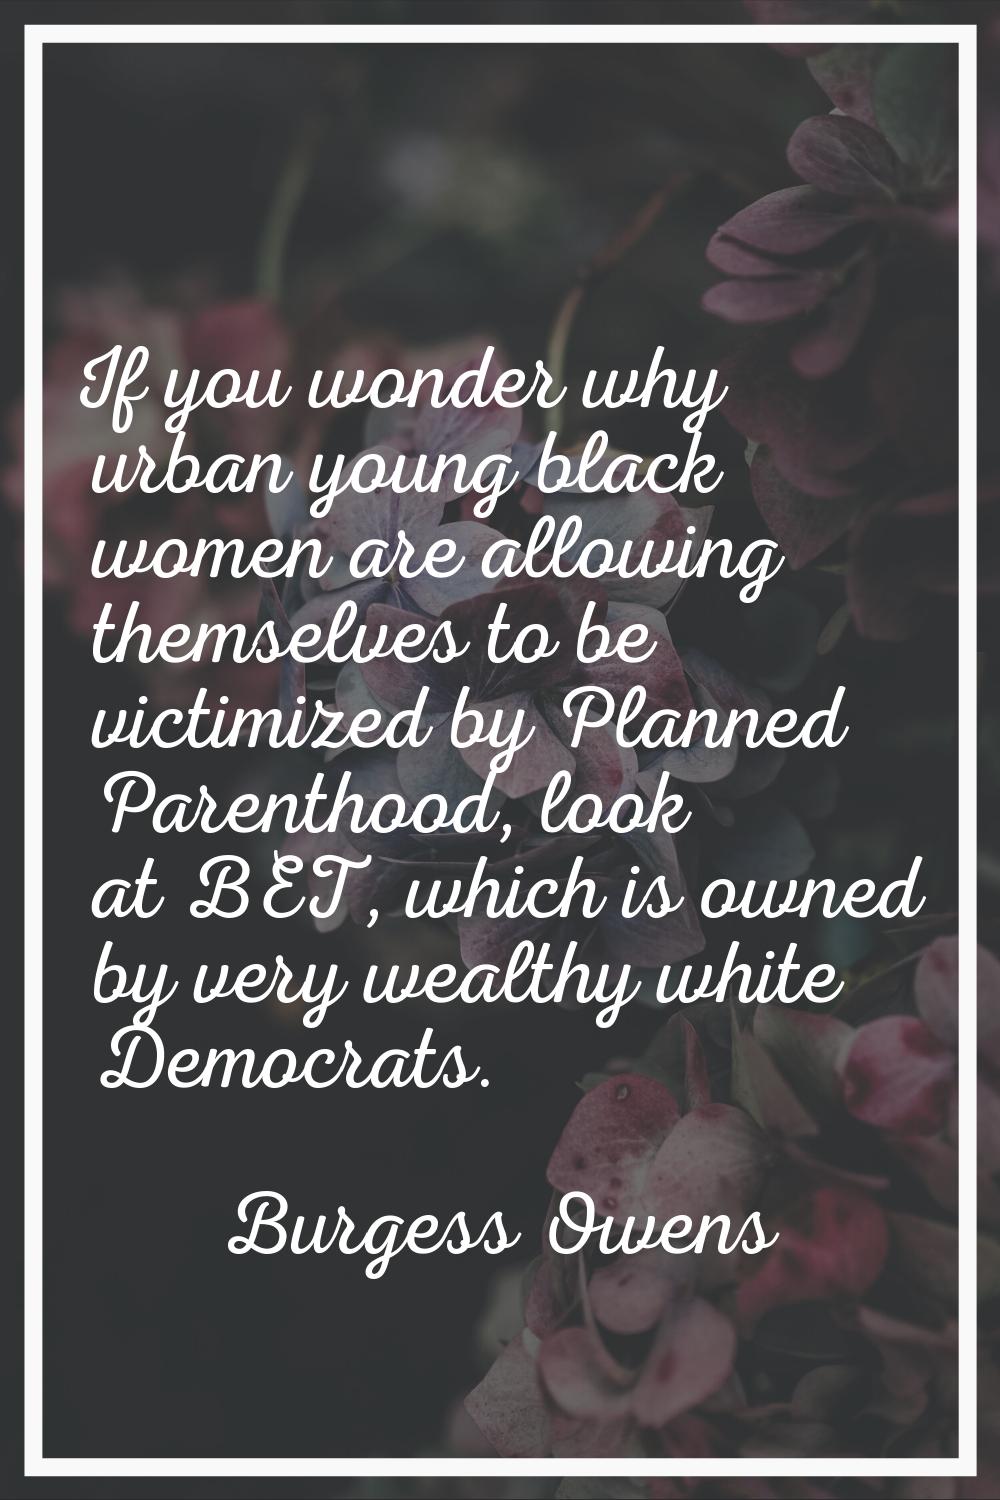 If you wonder why urban young black women are allowing themselves to be victimized by Planned Paren